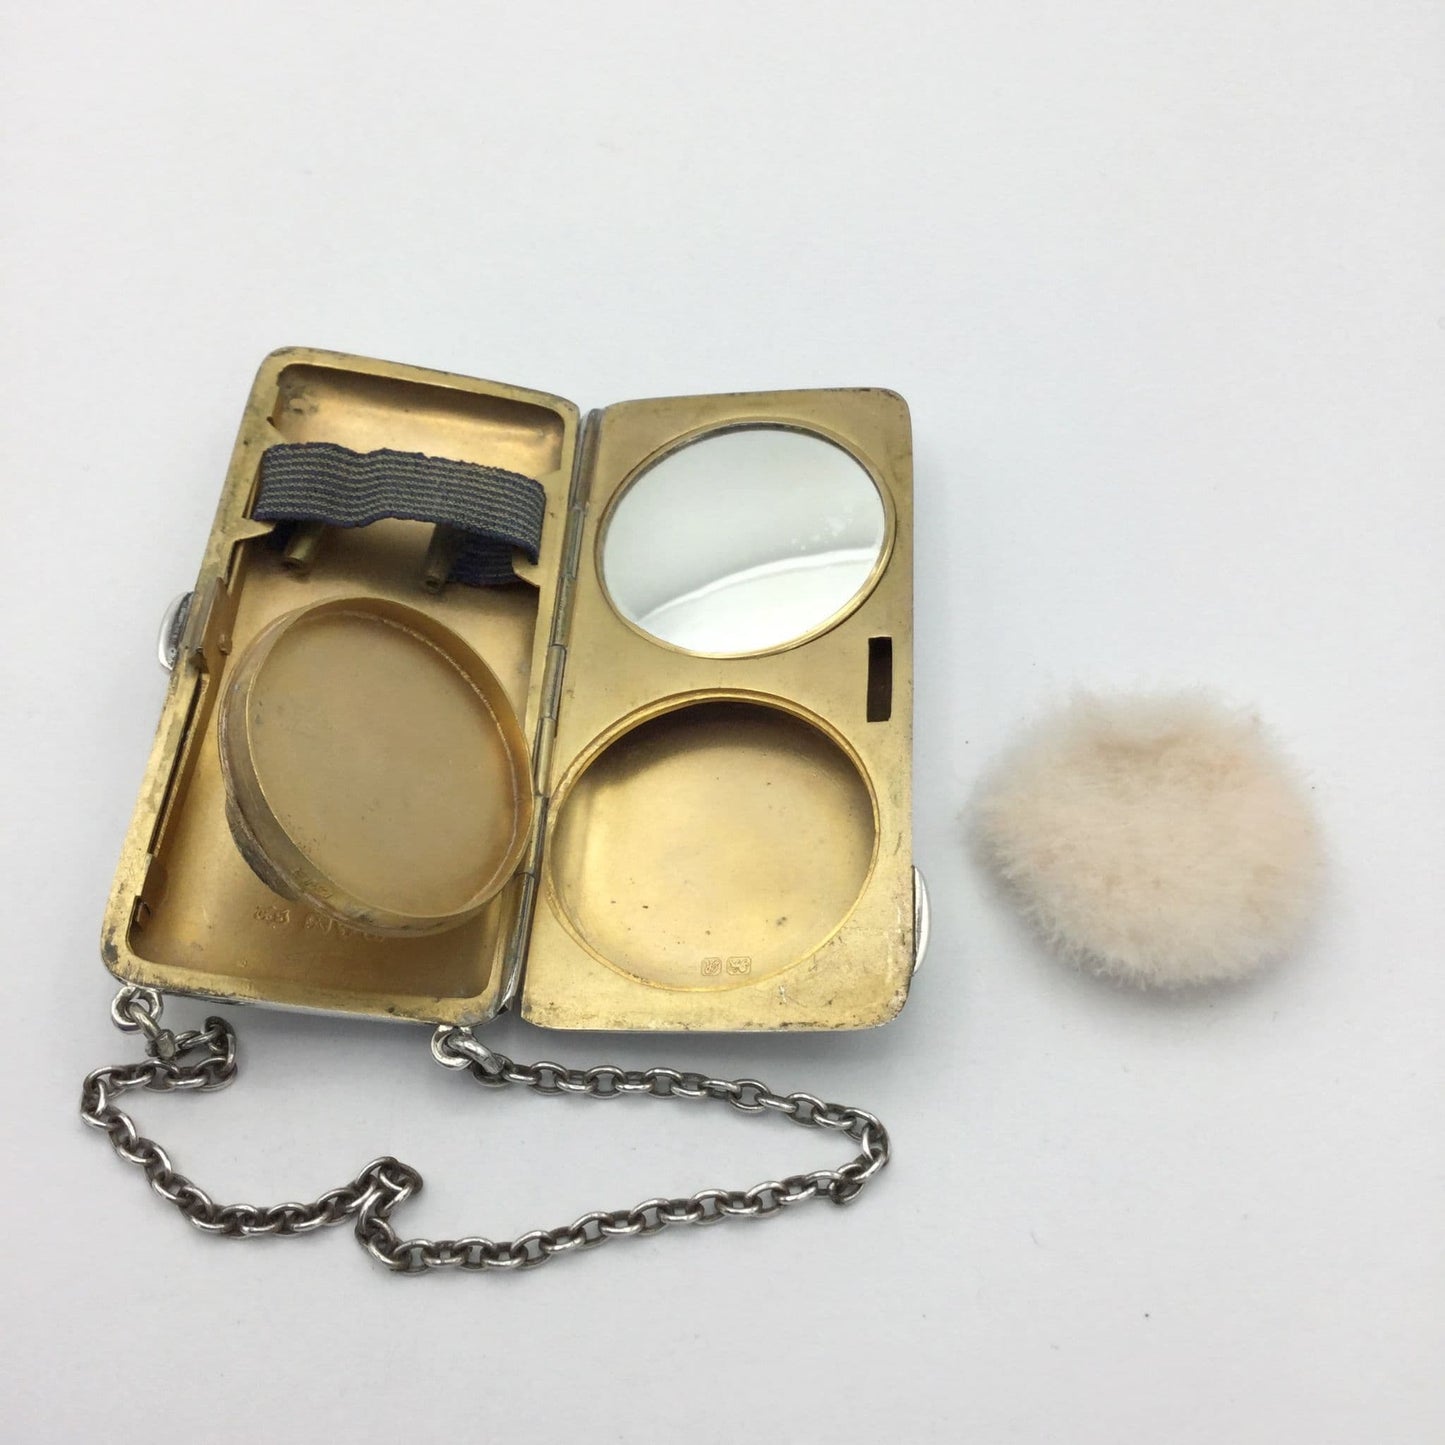 gilded golden inside of case showing a mirror, powder area and chain, with the unused powder puff at the side